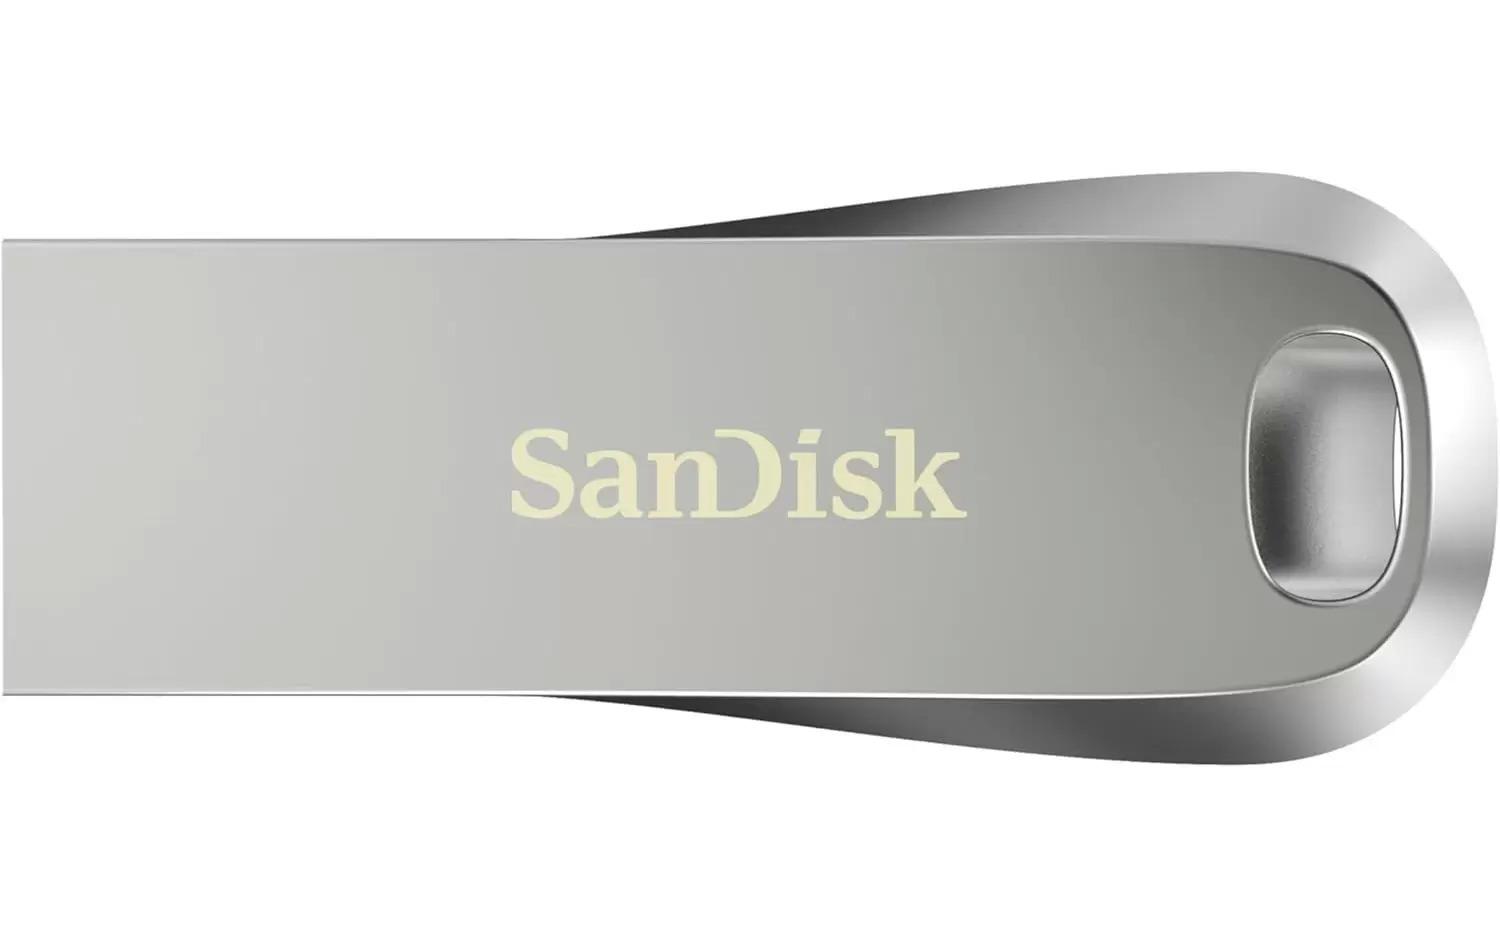 256GB SanDisk Ultra Luxe USB 3.1 Flash Drive for $12.49